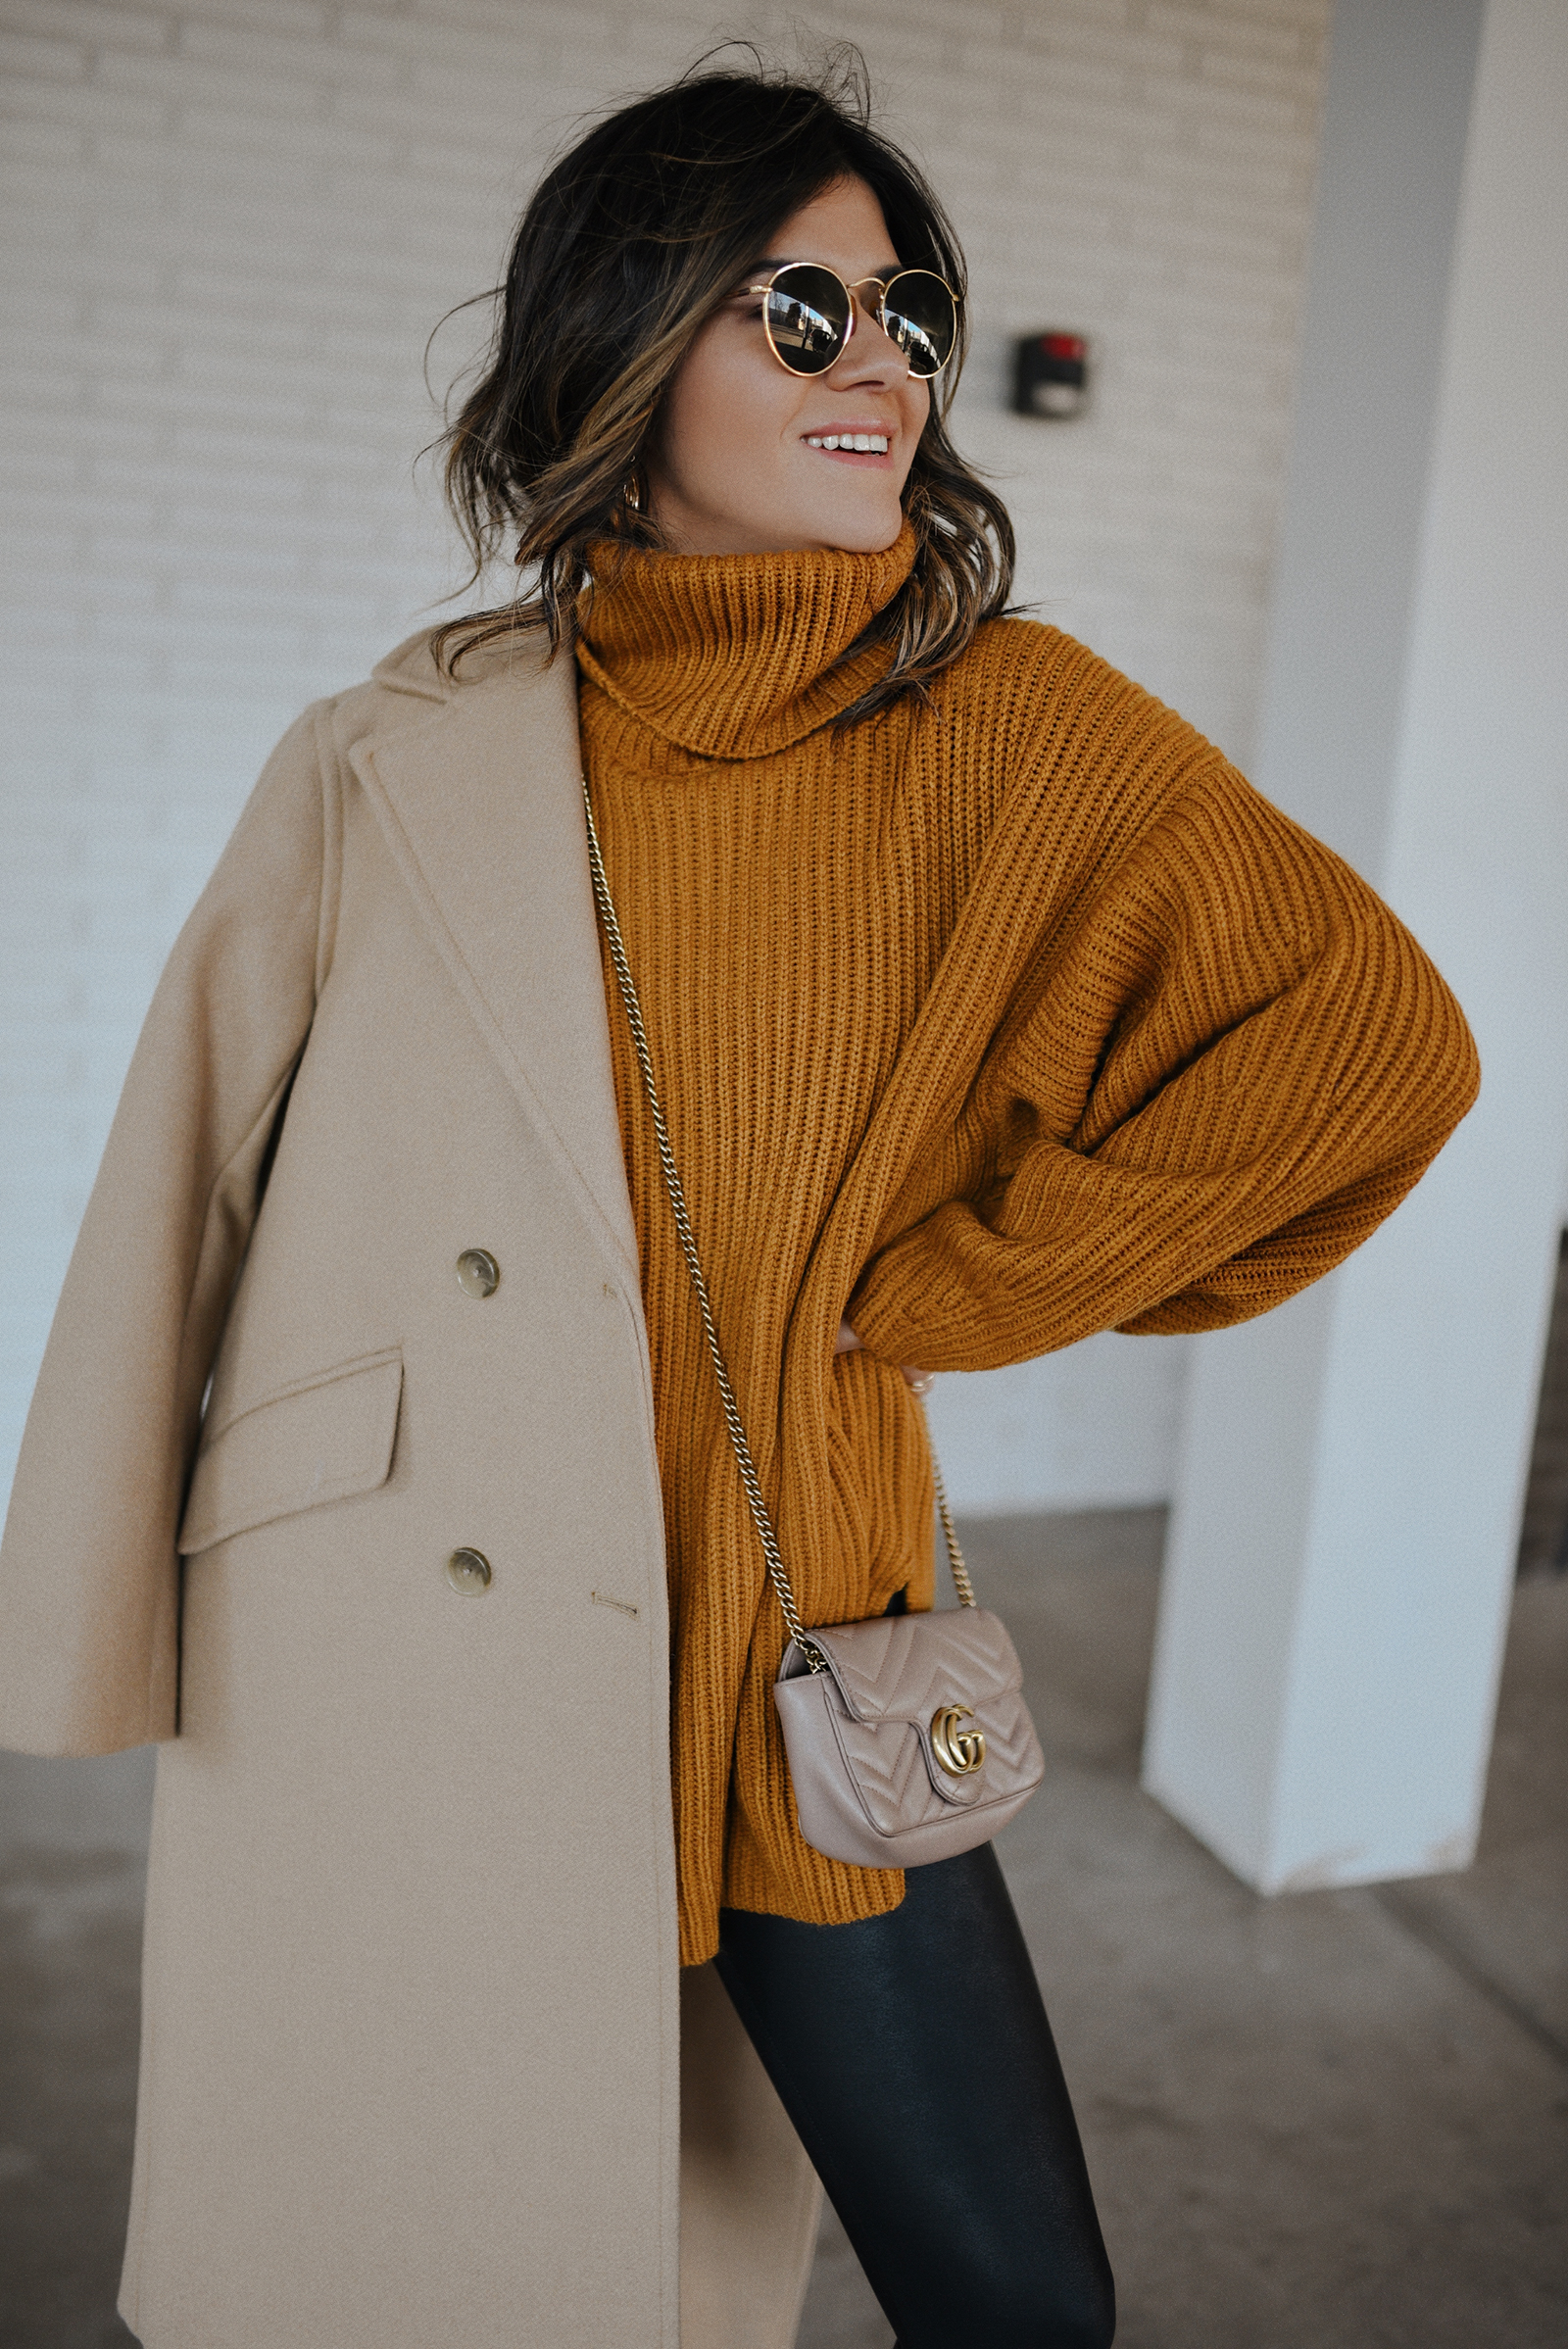 CAROLINA HELLAL FROM CHIC TALK WEARING A COZY MUSTARD SWEATER DRESS, A BEIGE COAT AND A CROSSBODY BAG GUCCI